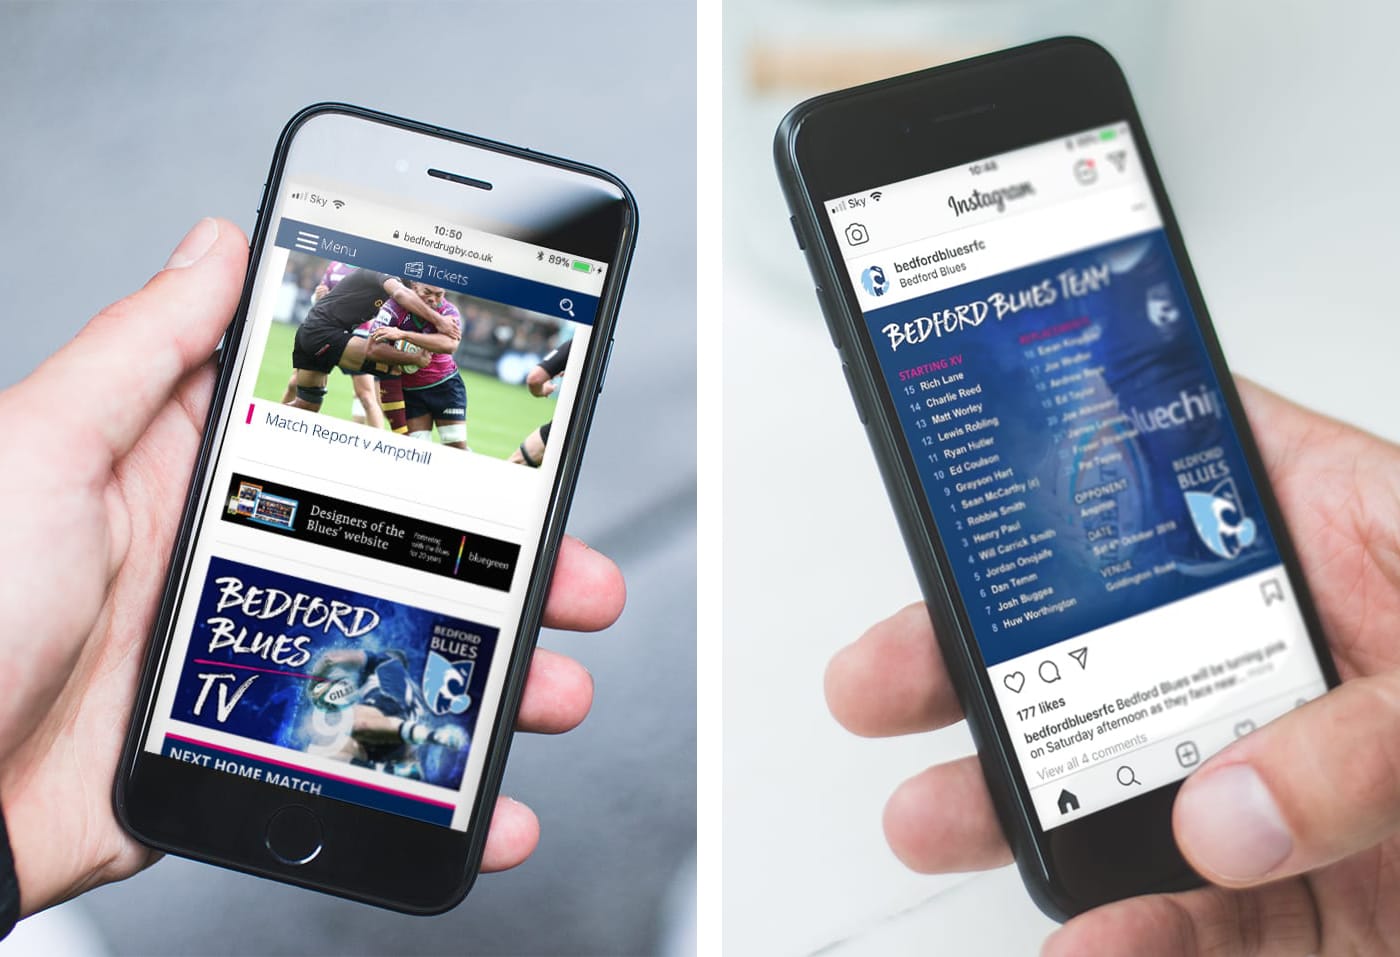 Creation of a fully-responsive website and associated graphics for the GKIPA Championship rugby club